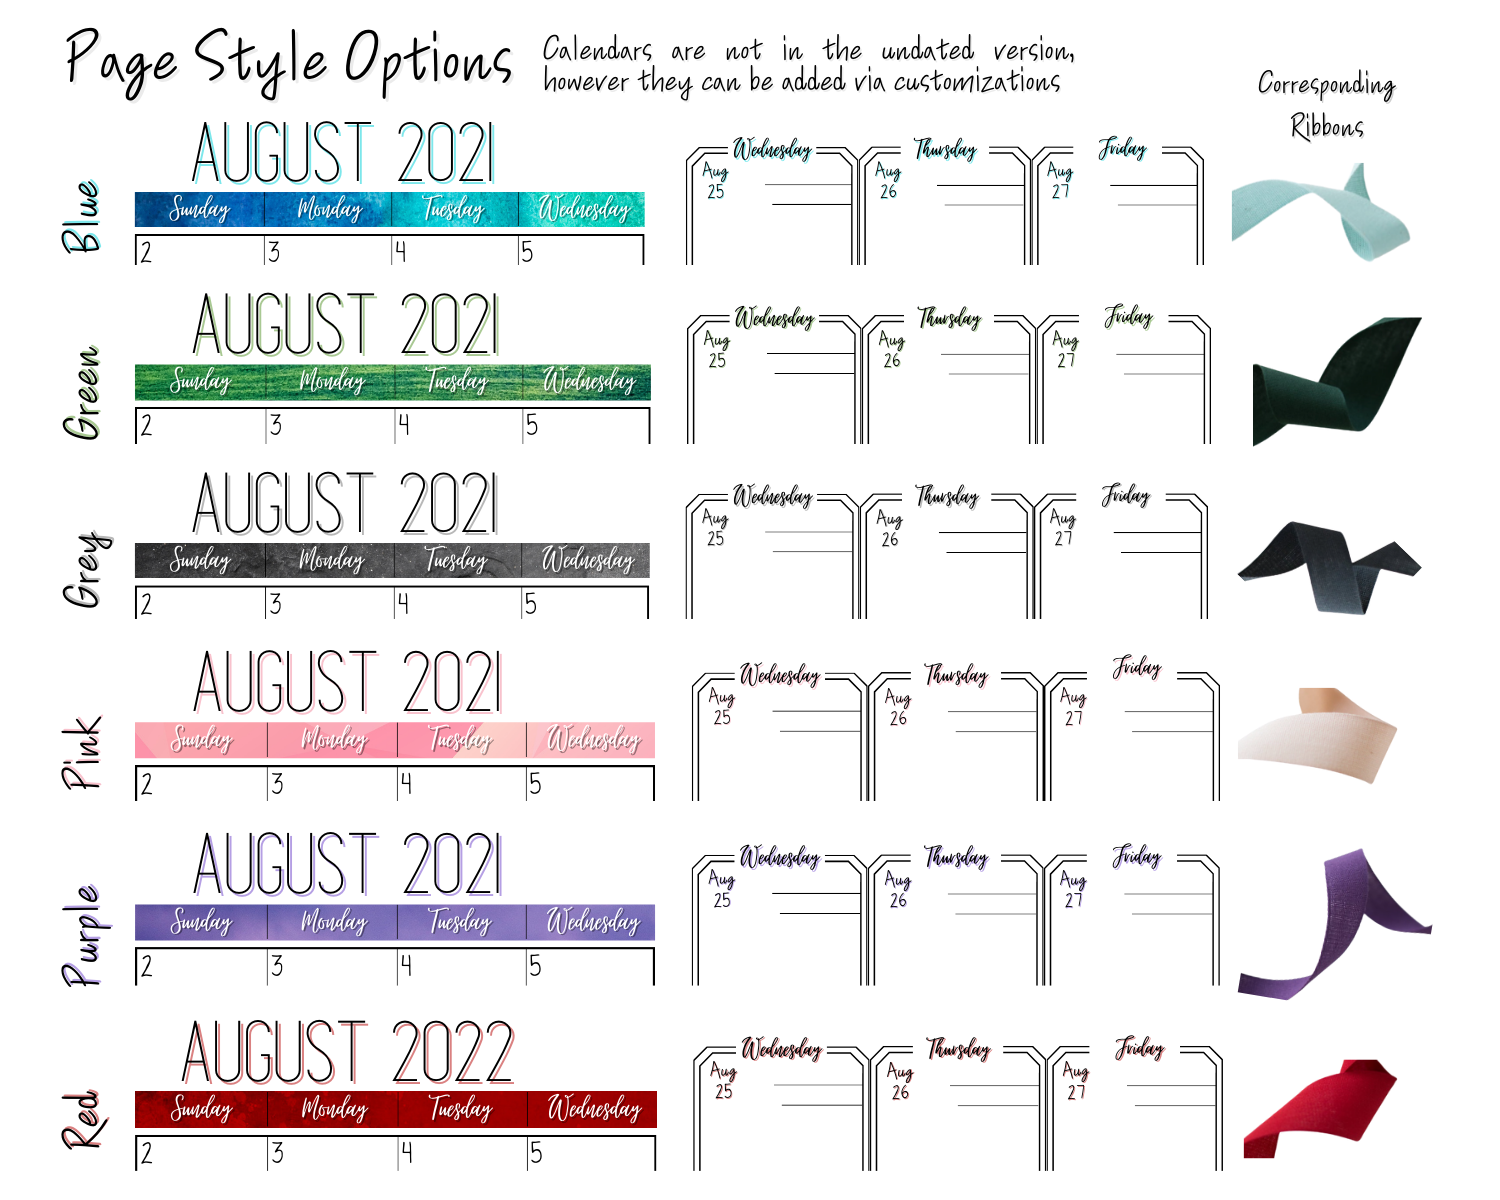 6 colors options are shown. Blue, Green, Grey, Pink, Purple, and Red. The colors for the days of the week for months is shown as well as the header on the main pages which have a shadow of a matching color. On the right is a column called corresponding ribbons that show the color of each ribbon that is attached as a bookmark, the color matches but the shade varies. A note says calendars are not in the undated version, however they can be added via customizations.